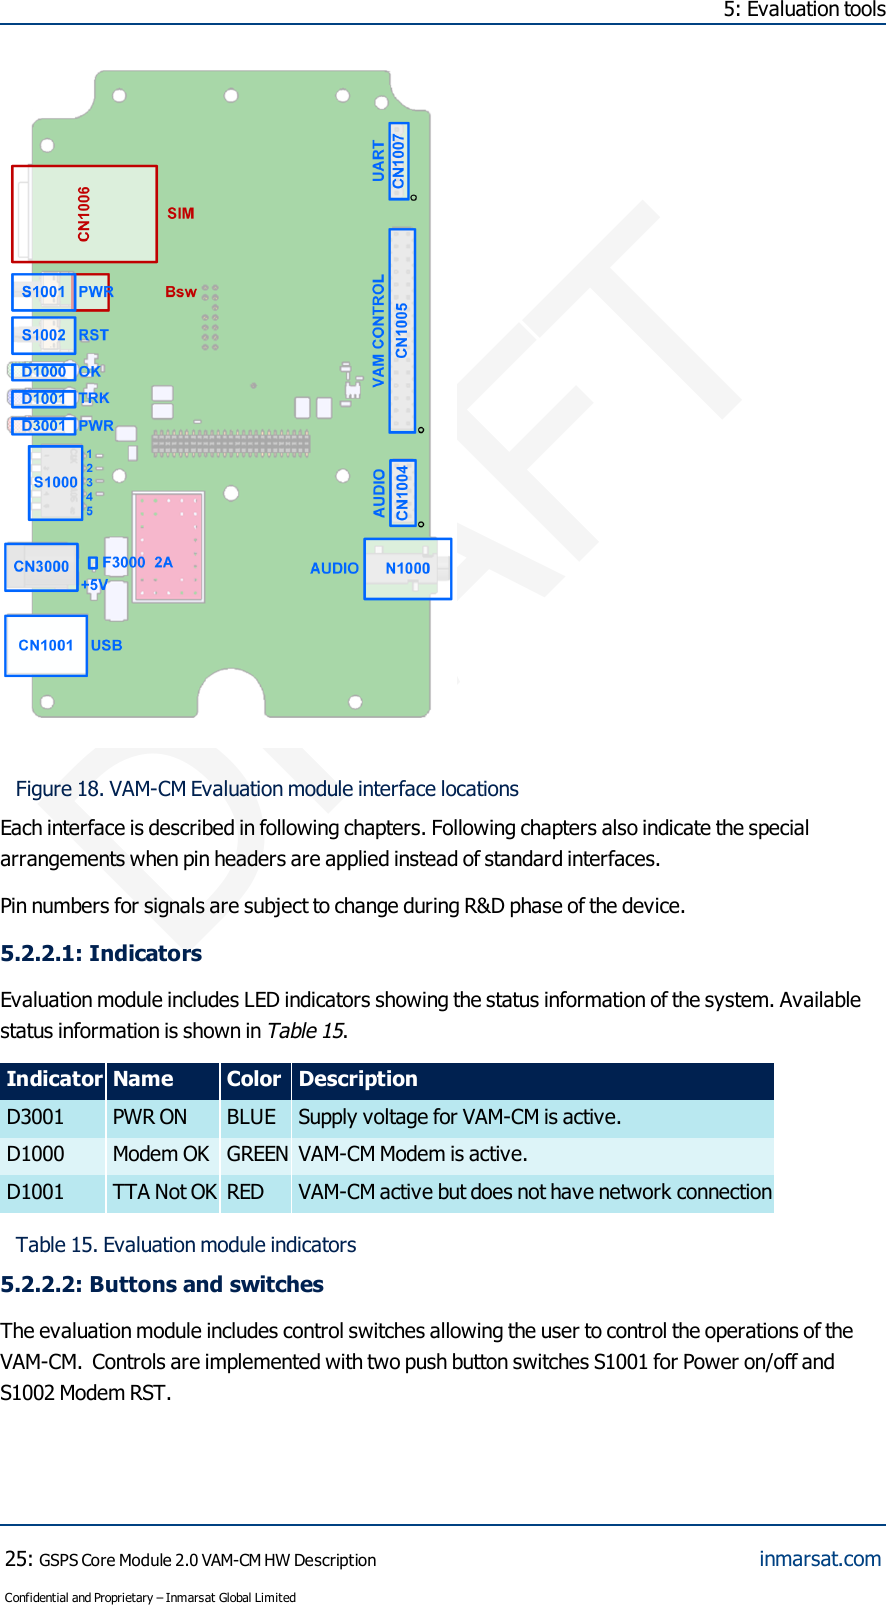 DRAFT5: Evaluation toolsFigure 18. VAM-CM Evaluation module interface locationsEach interface is described in following chapters. Following chapters also indicate the specialarrangements when pin headers are applied instead of standard interfaces.Pin numbers for signals are subject to change during R&amp;D phase of the device.5.2.2.1:IndicatorsEvaluation module includes LED indicators showing the status information of the system. Availablestatus information is shown inTable 15.Indicator Name Color DescriptionD3001 PWR ON BLUE Supply voltage for VAM-CM is active.D1000 Modem OK GREEN VAM-CM Modem is active.D1001 TTA Not OK RED VAM-CM active but does not have network connectionTable 15. Evaluation module indicators5.2.2.2:Buttons and switchesThe evaluation module includes control switches allowing the user to control the operations of theVAM-CM. Controls are implemented with two push button switches S1001 for Power on/off andS1002 Modem RST.25:GSPS Core Module 2.0 VAM-CM HW DescriptionConfidential and Proprietary – Inmarsat Global Limitedinmarsat.com